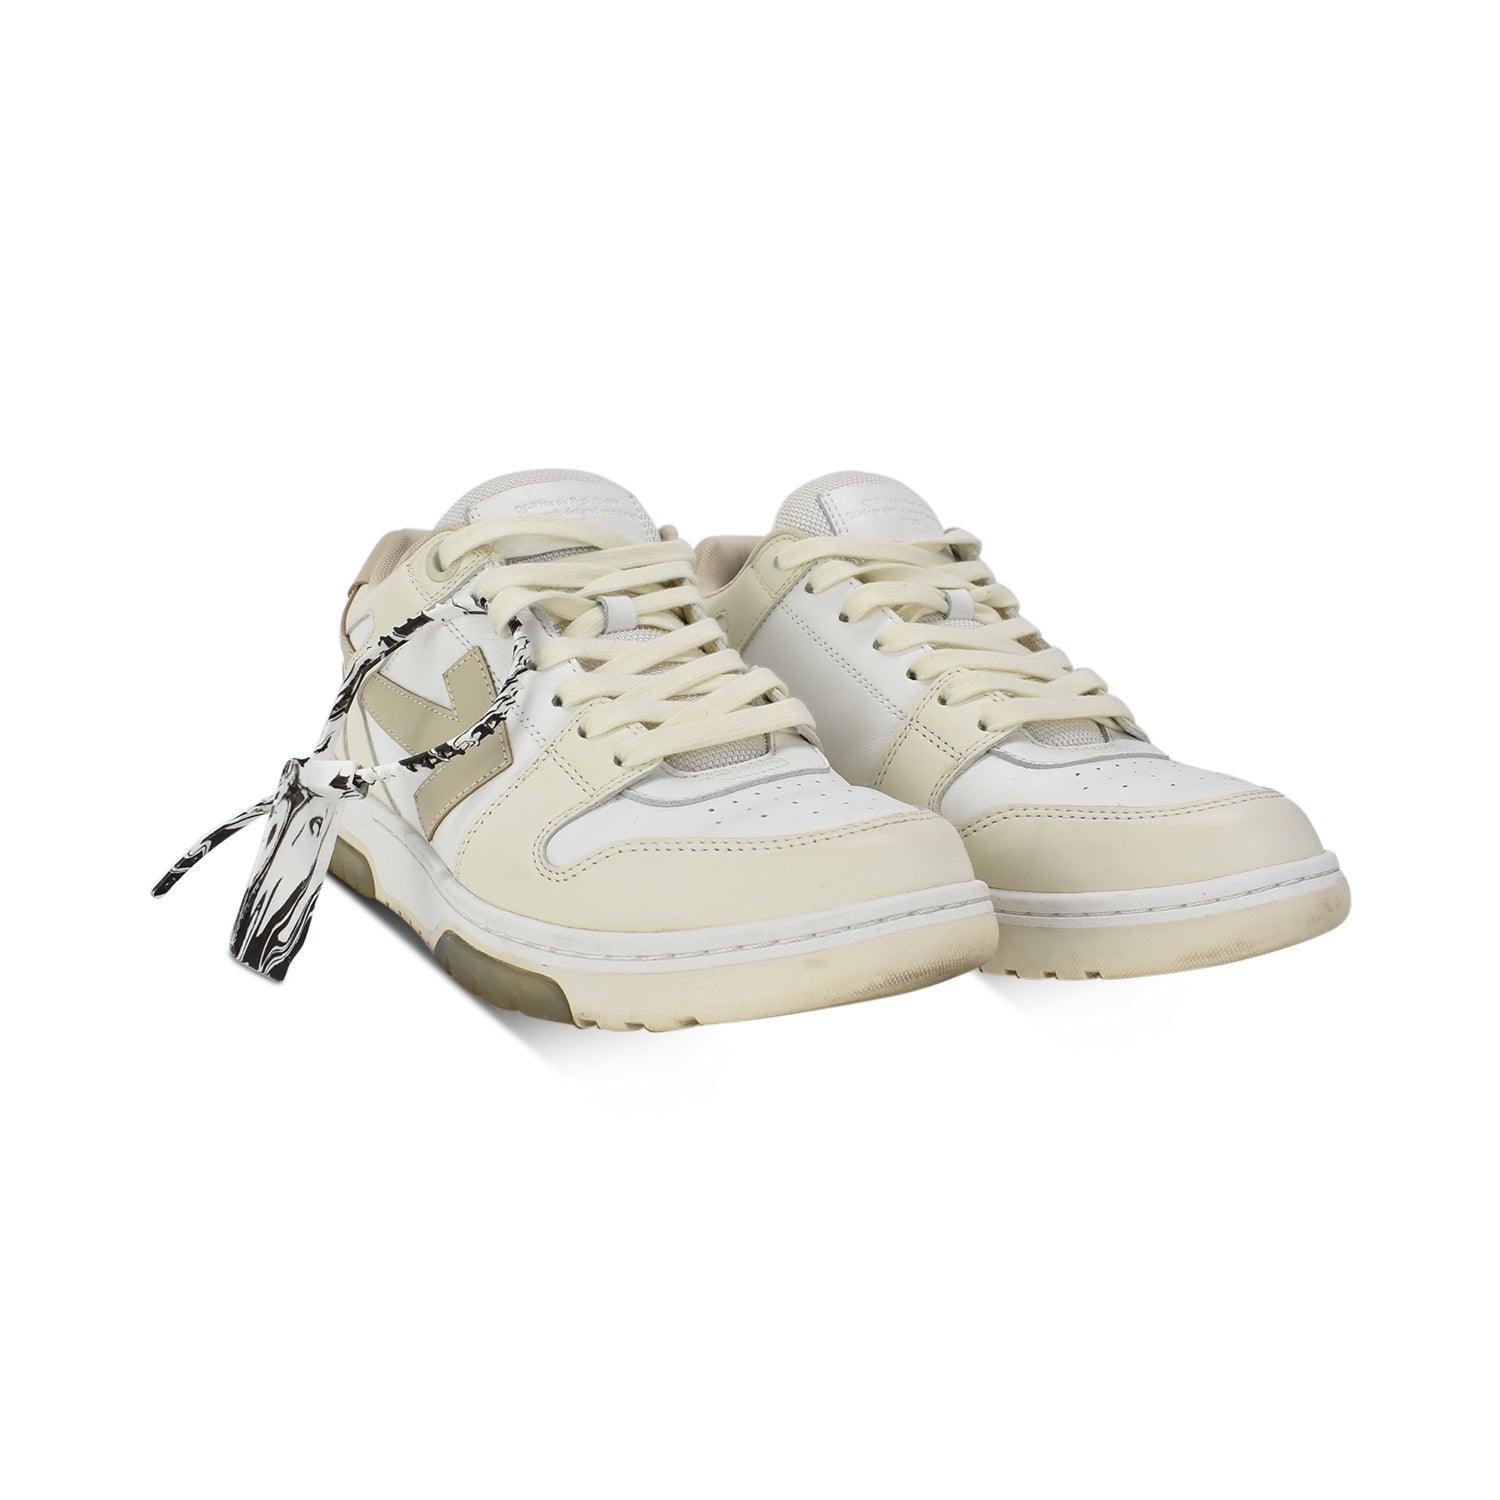 OFF WHITE Cream Mens SIZE 41 Shoes - Fashionably Yours